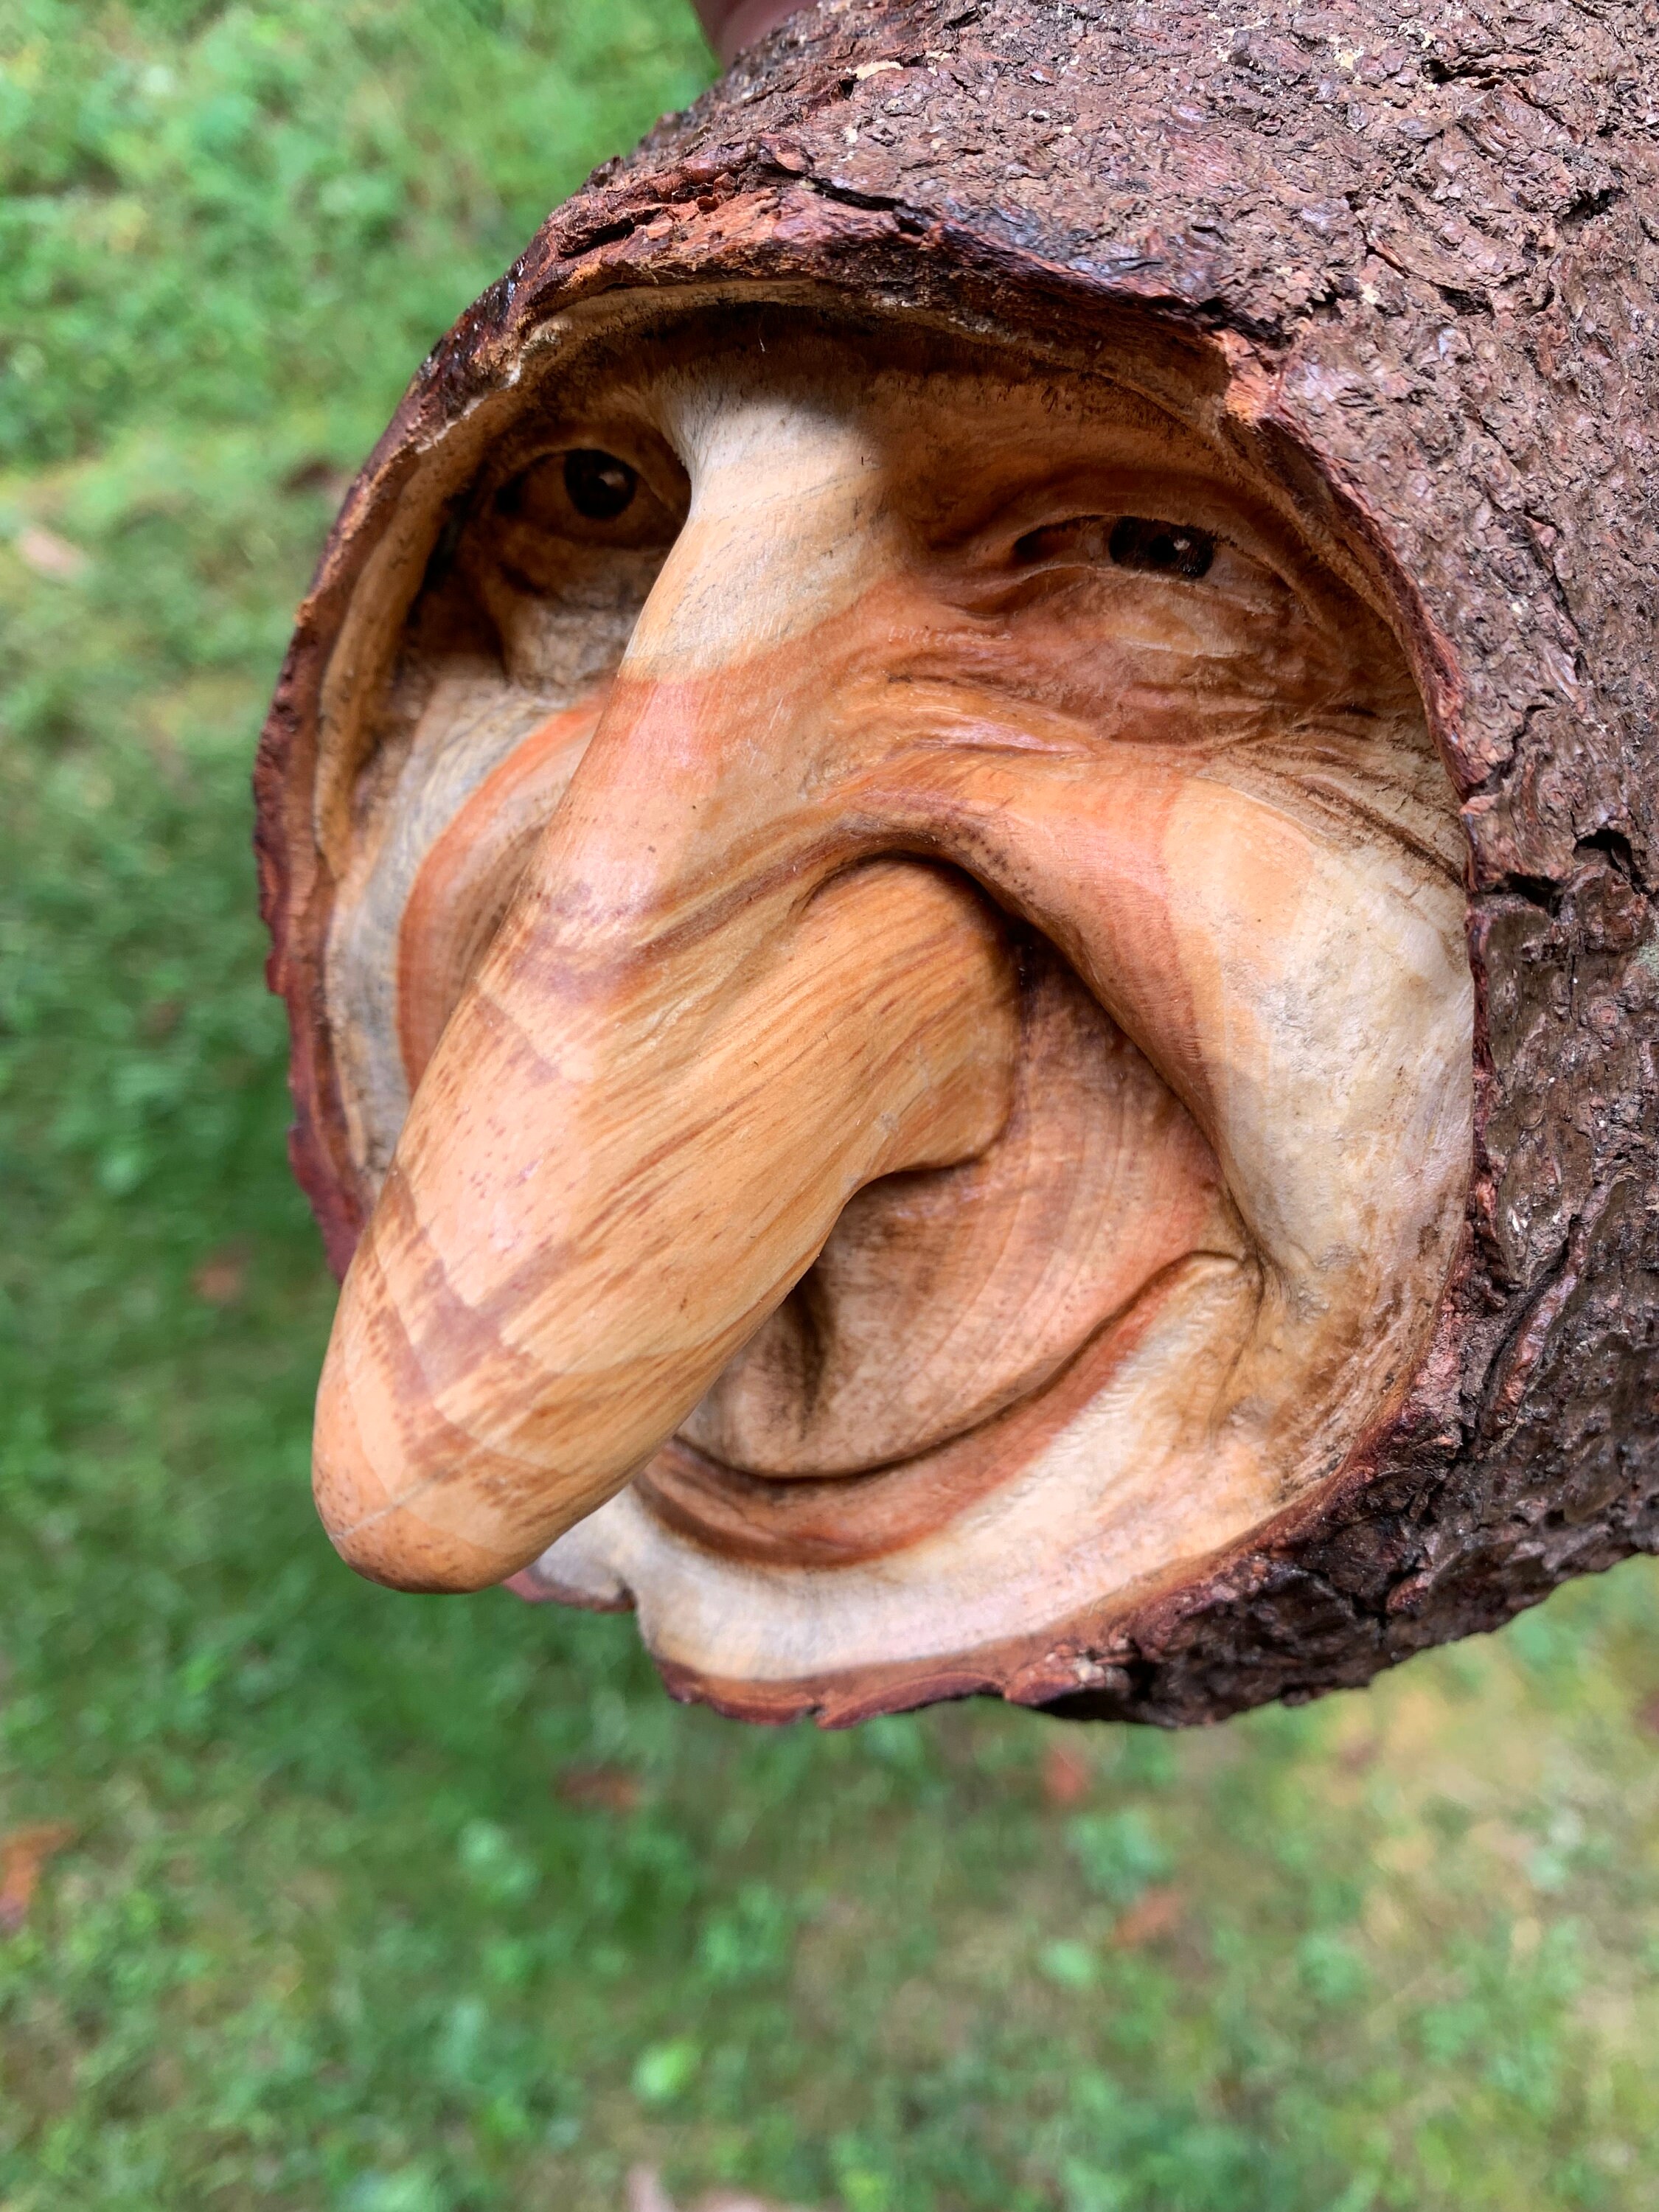 First ever carving (wood spirit) : r/Woodcarving